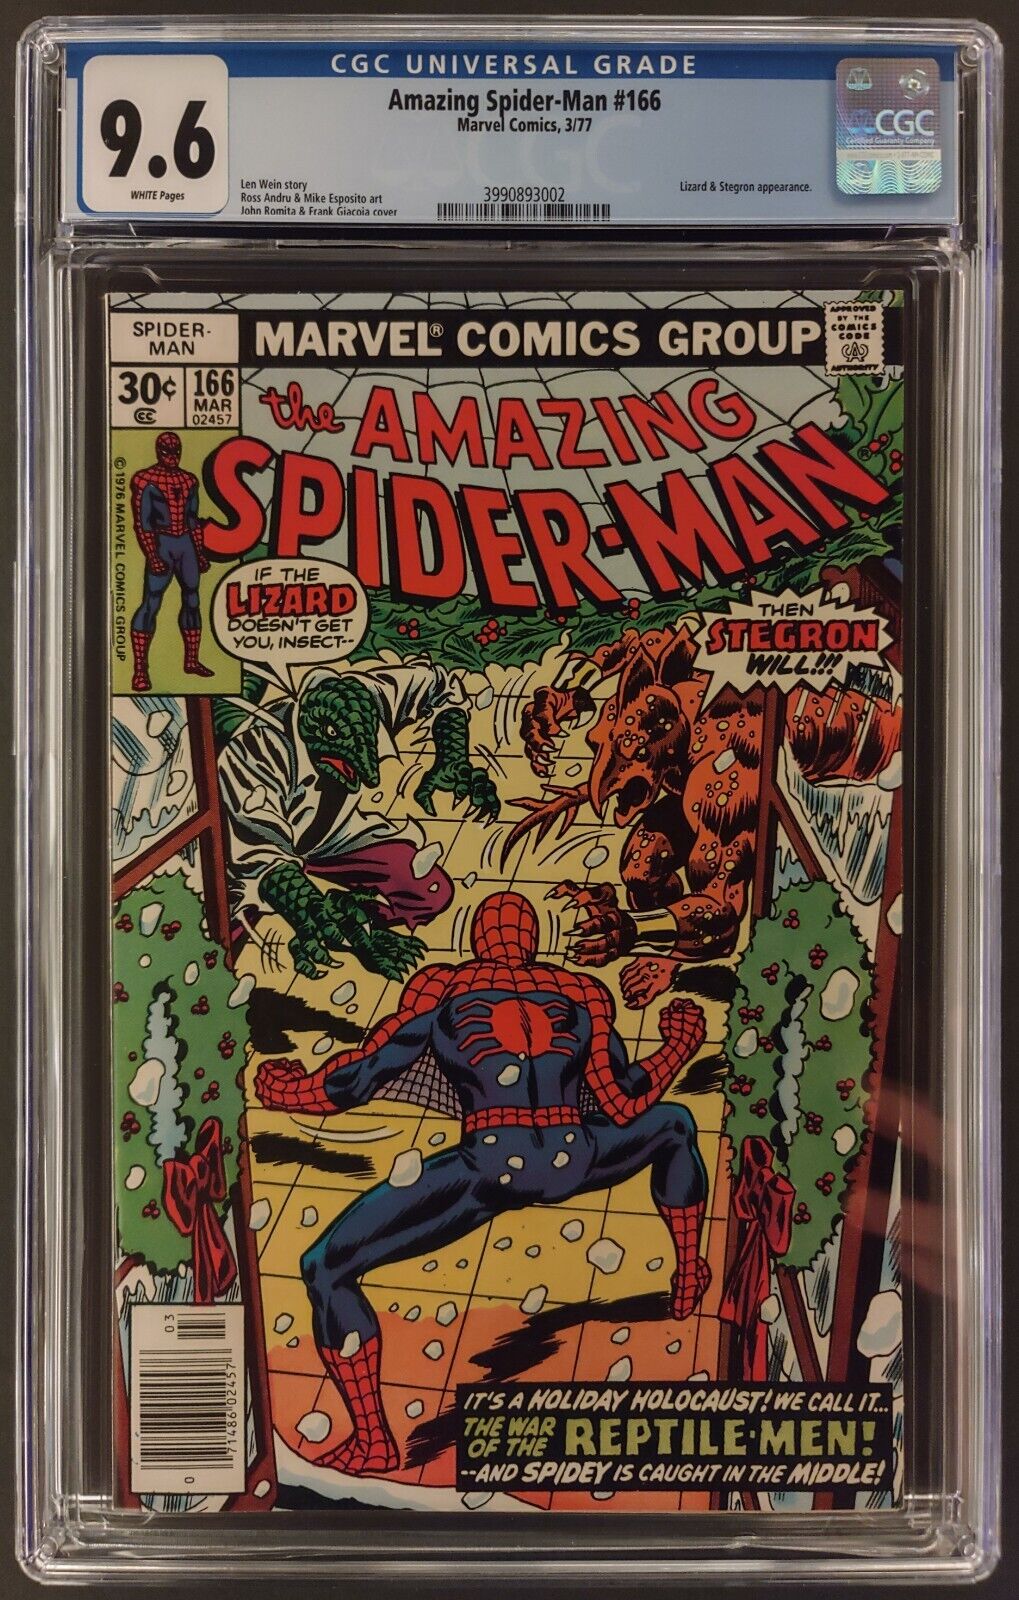 AMAZING SPIDER-MAN #166 CGC 9.6 WHITE PAGES MARVEL COMICS MARCH 1977 LIZARD APP